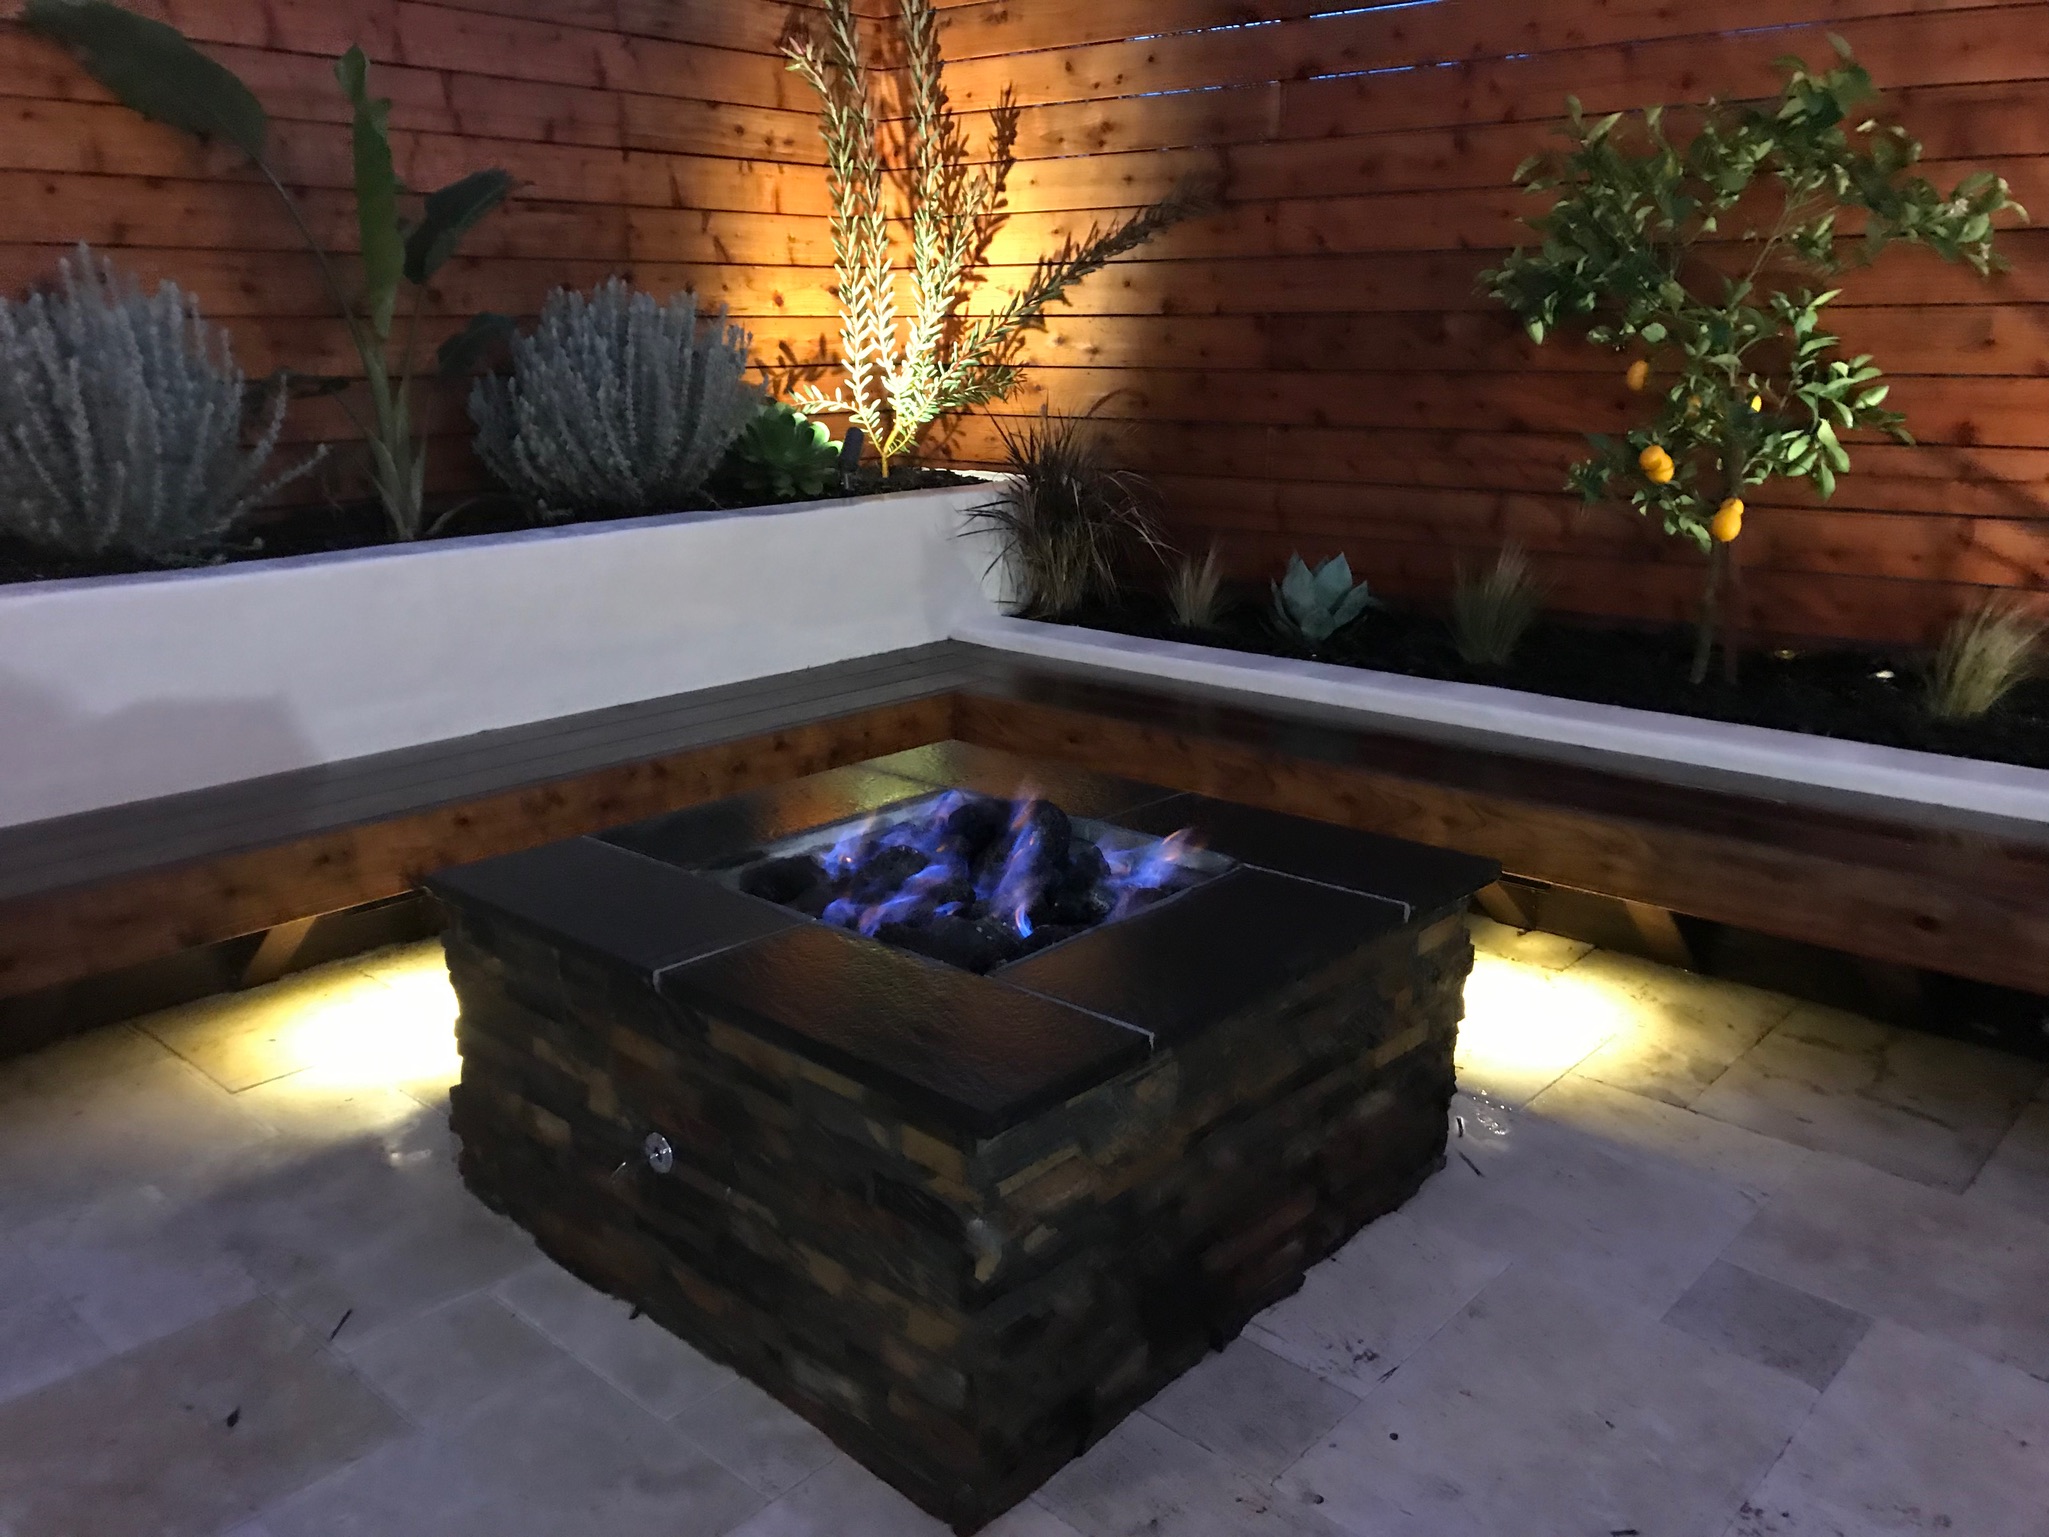 Close-up of lit fire pit in foreground with blue flames. Raised planters, plants, and redwood fence in background.